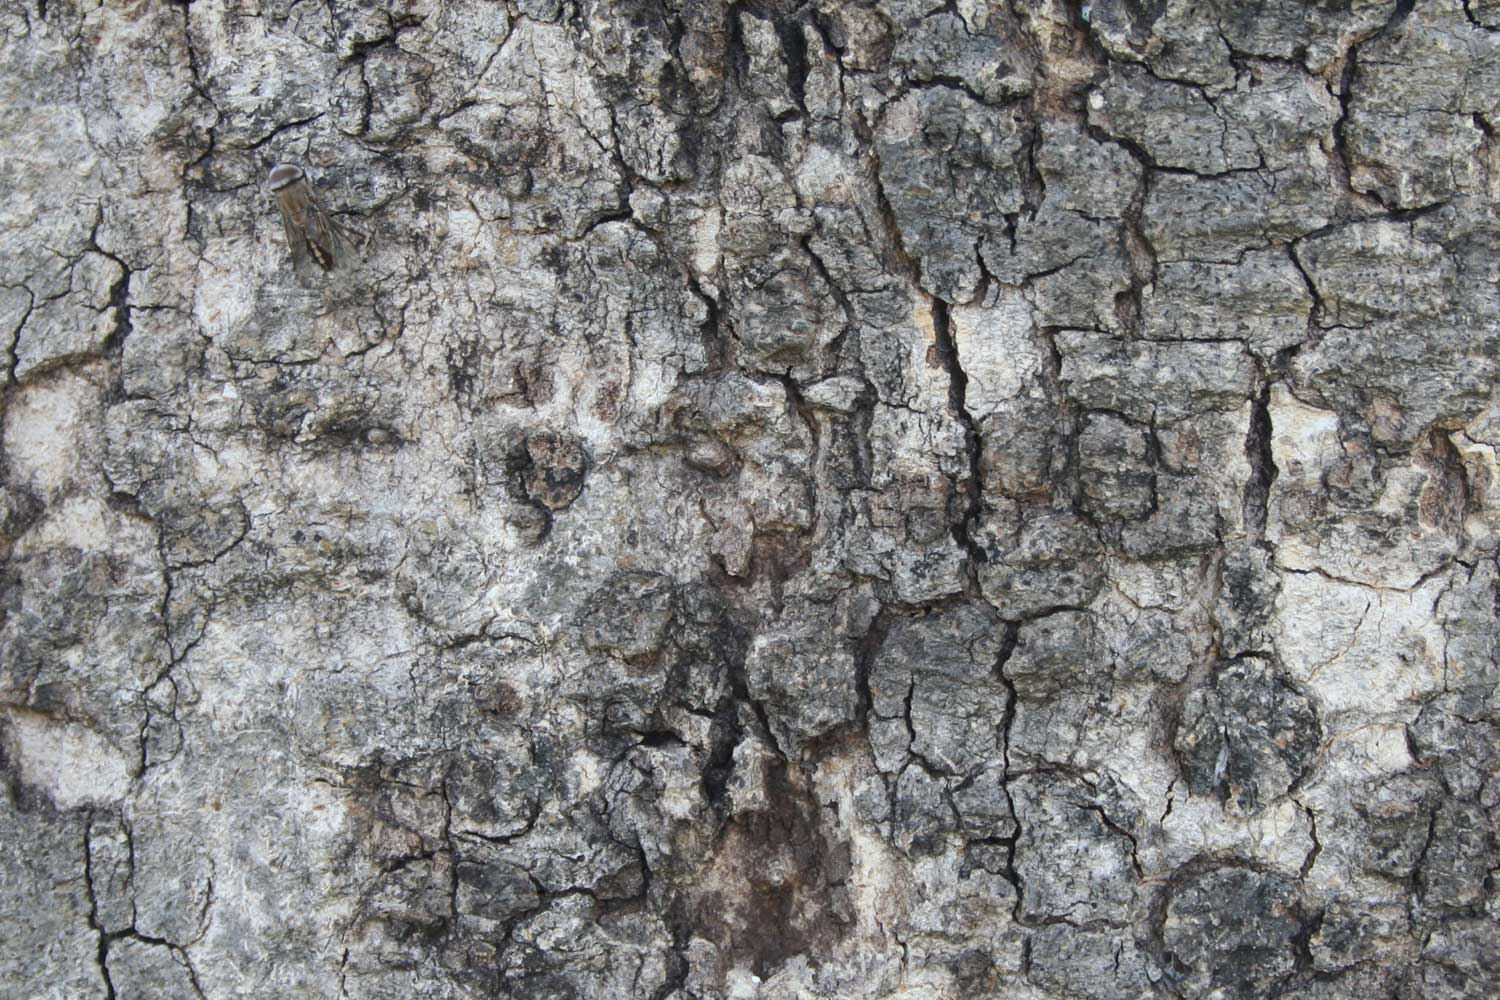 a tree bark with brown spots and white lices